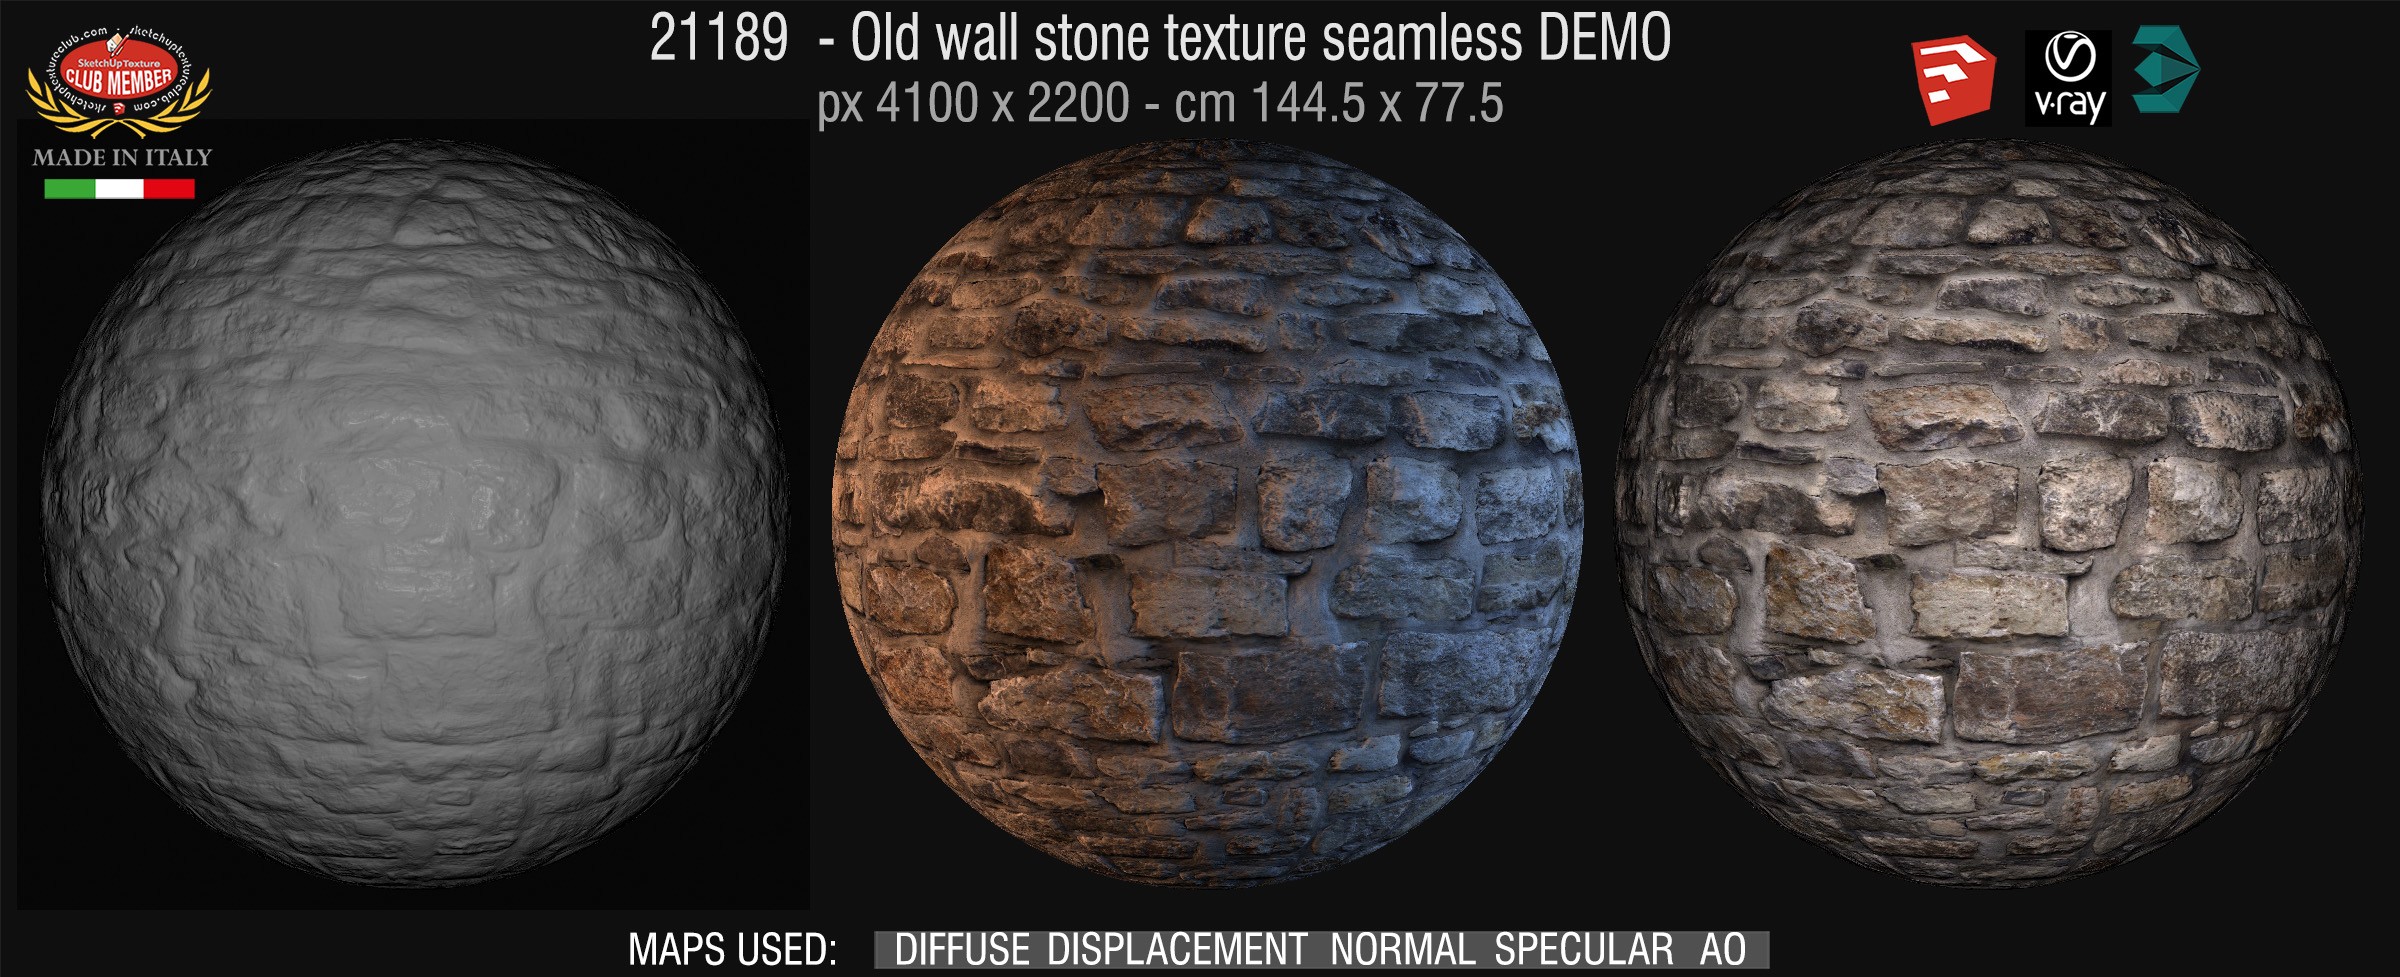 21189 - HR Old wall stone texture + maps DEMO